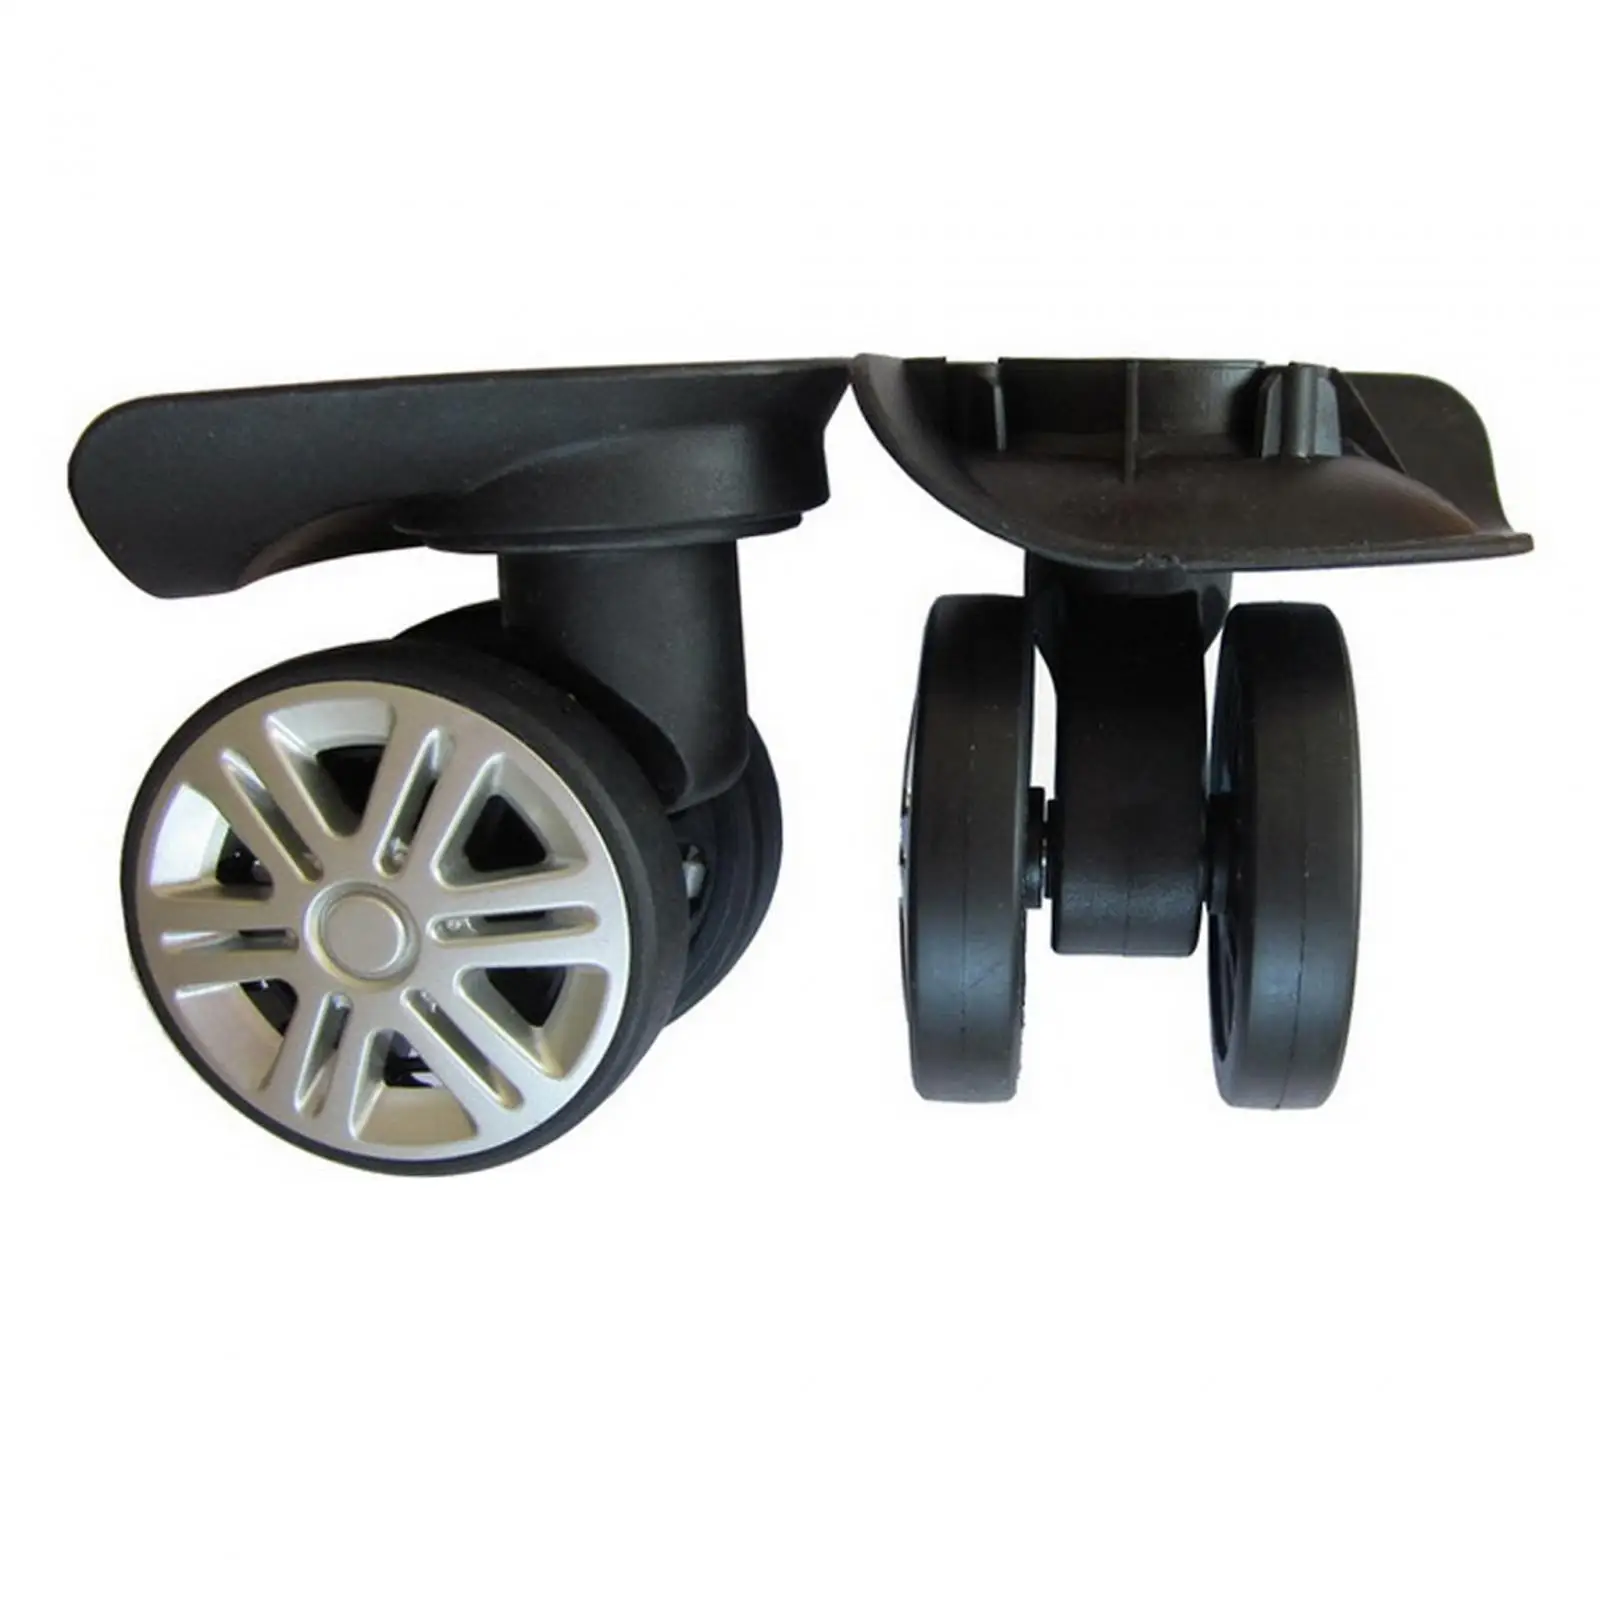 

2x 360 Swivel Luggage Replacement Wheels Luggage Suitcase Casters Suitcase Swivel Caster Wheels for Trolley Case Bags Repair Set